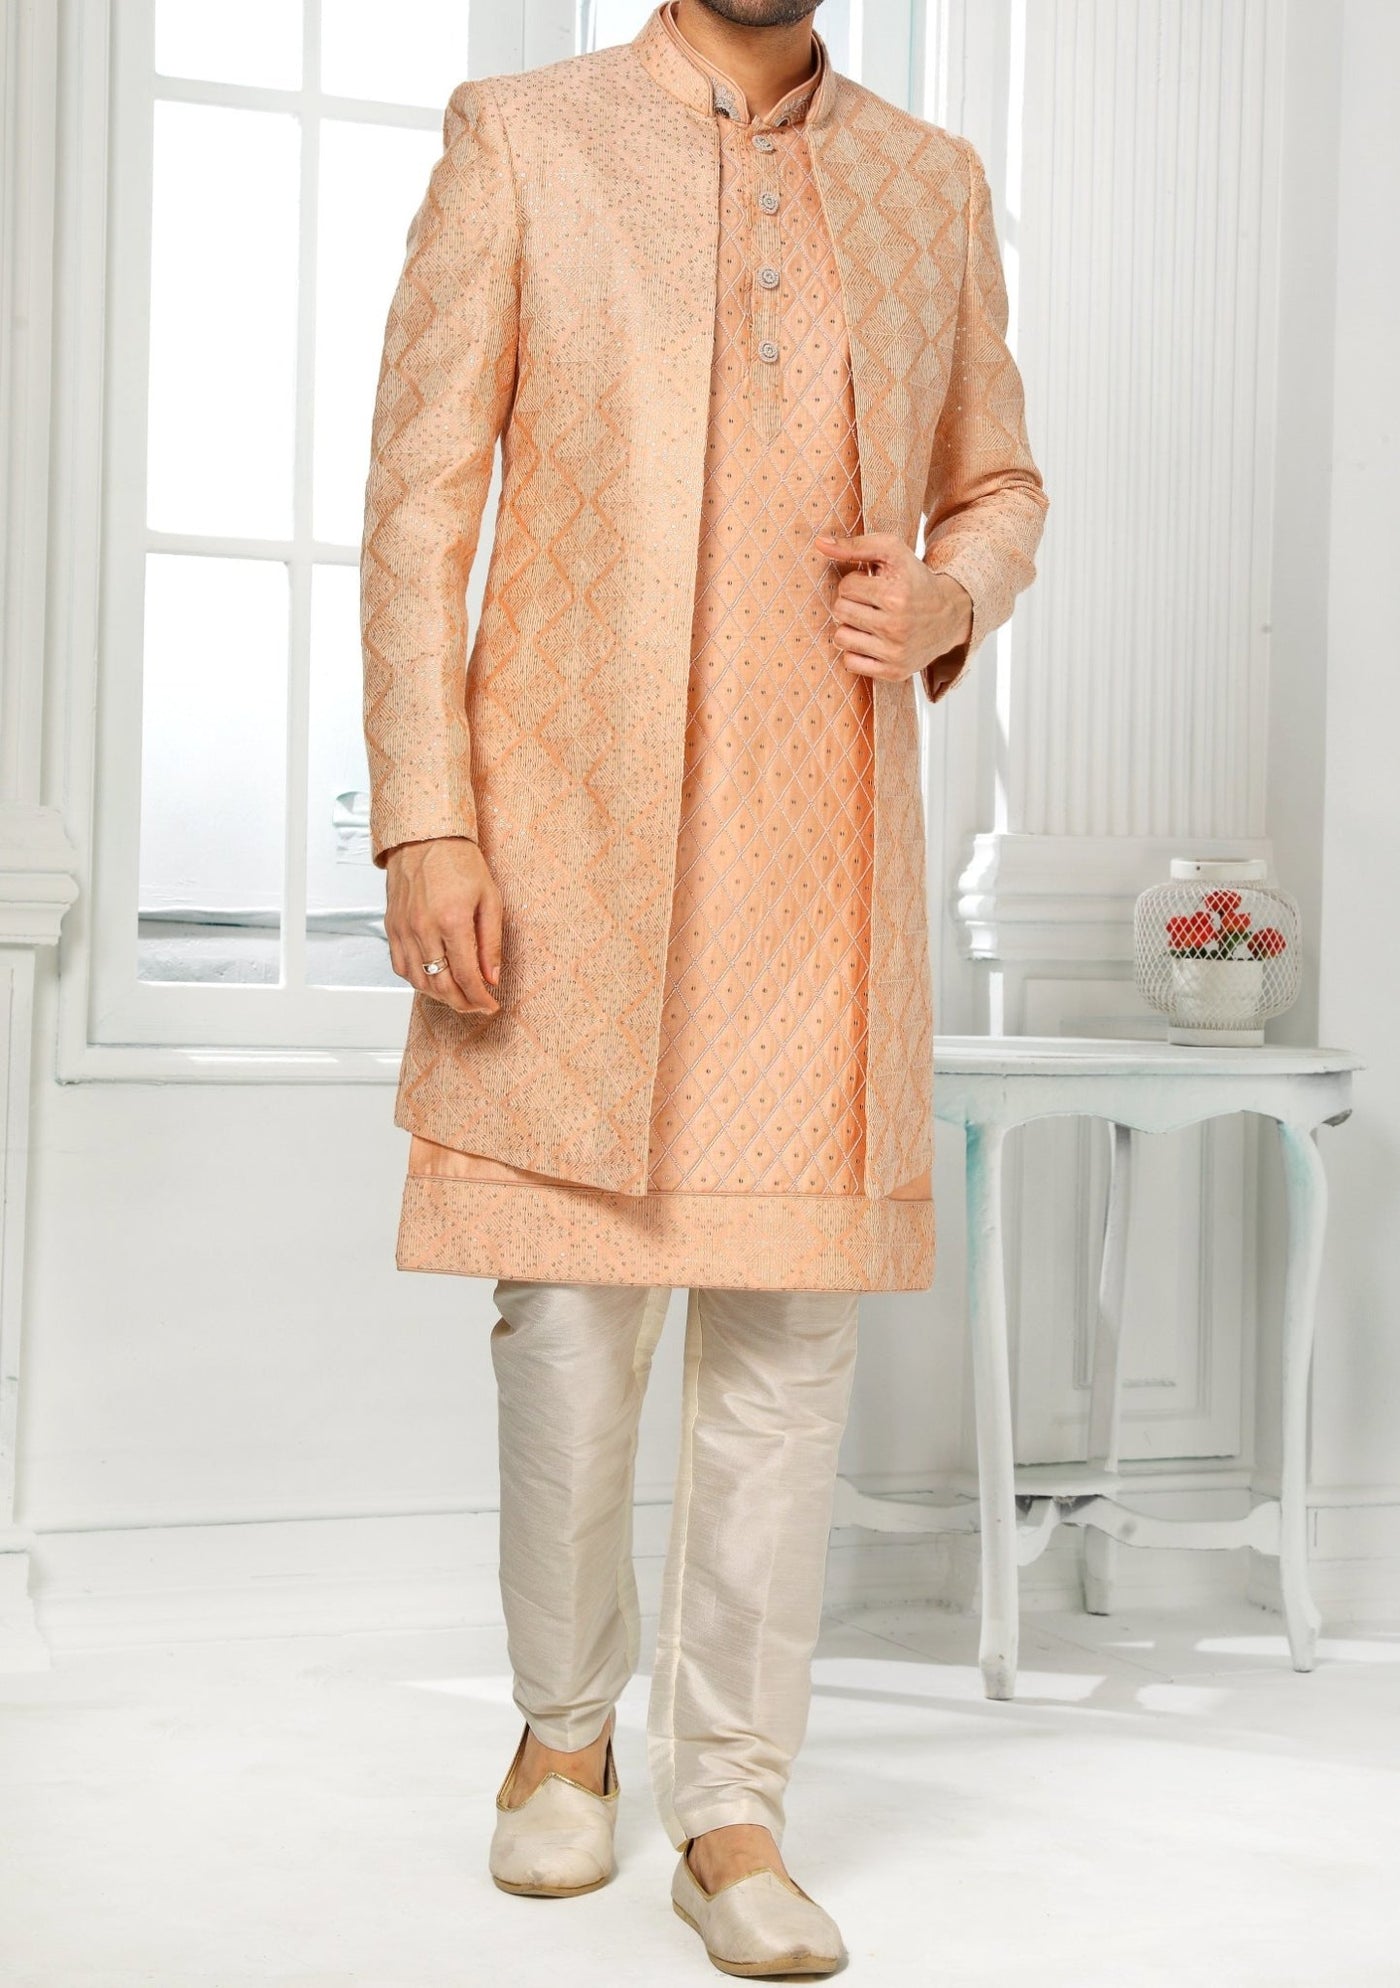 Men's Indo Western Party Wear Sherwani Suit With Jacket - db20428